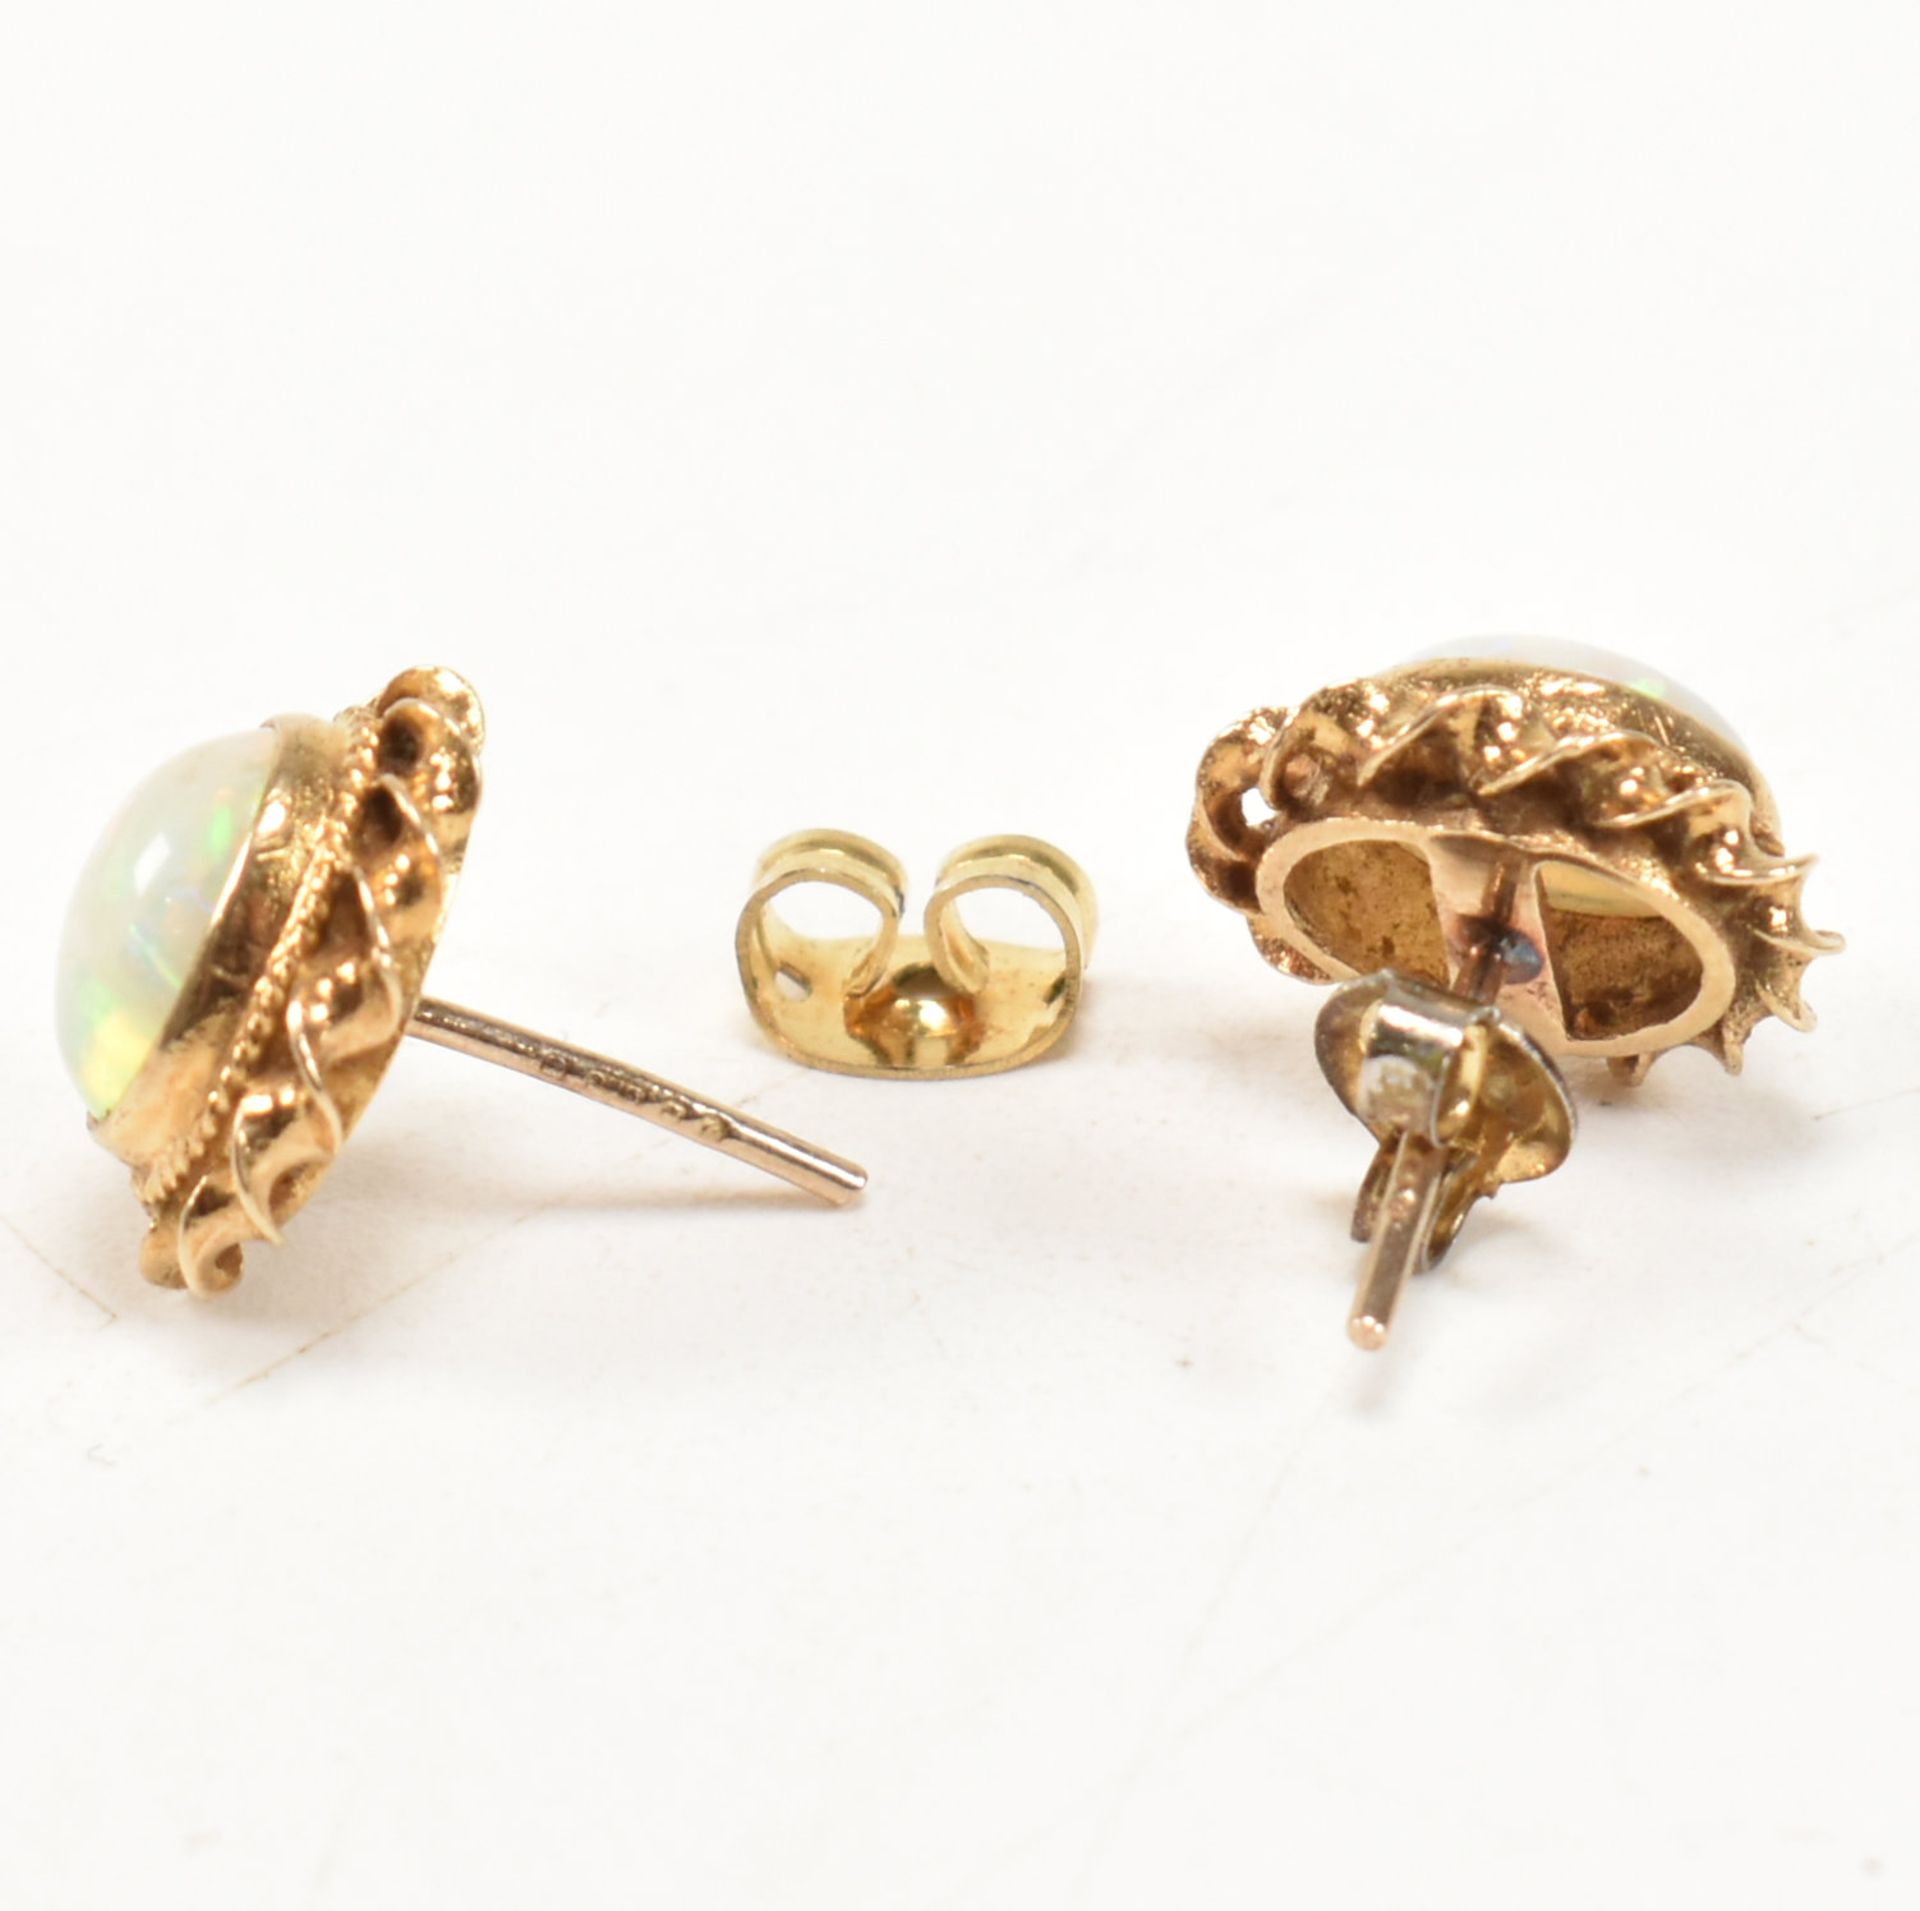 TWO PAIRS OF 9CT GOLD STUD EARRINGS - Image 6 of 8